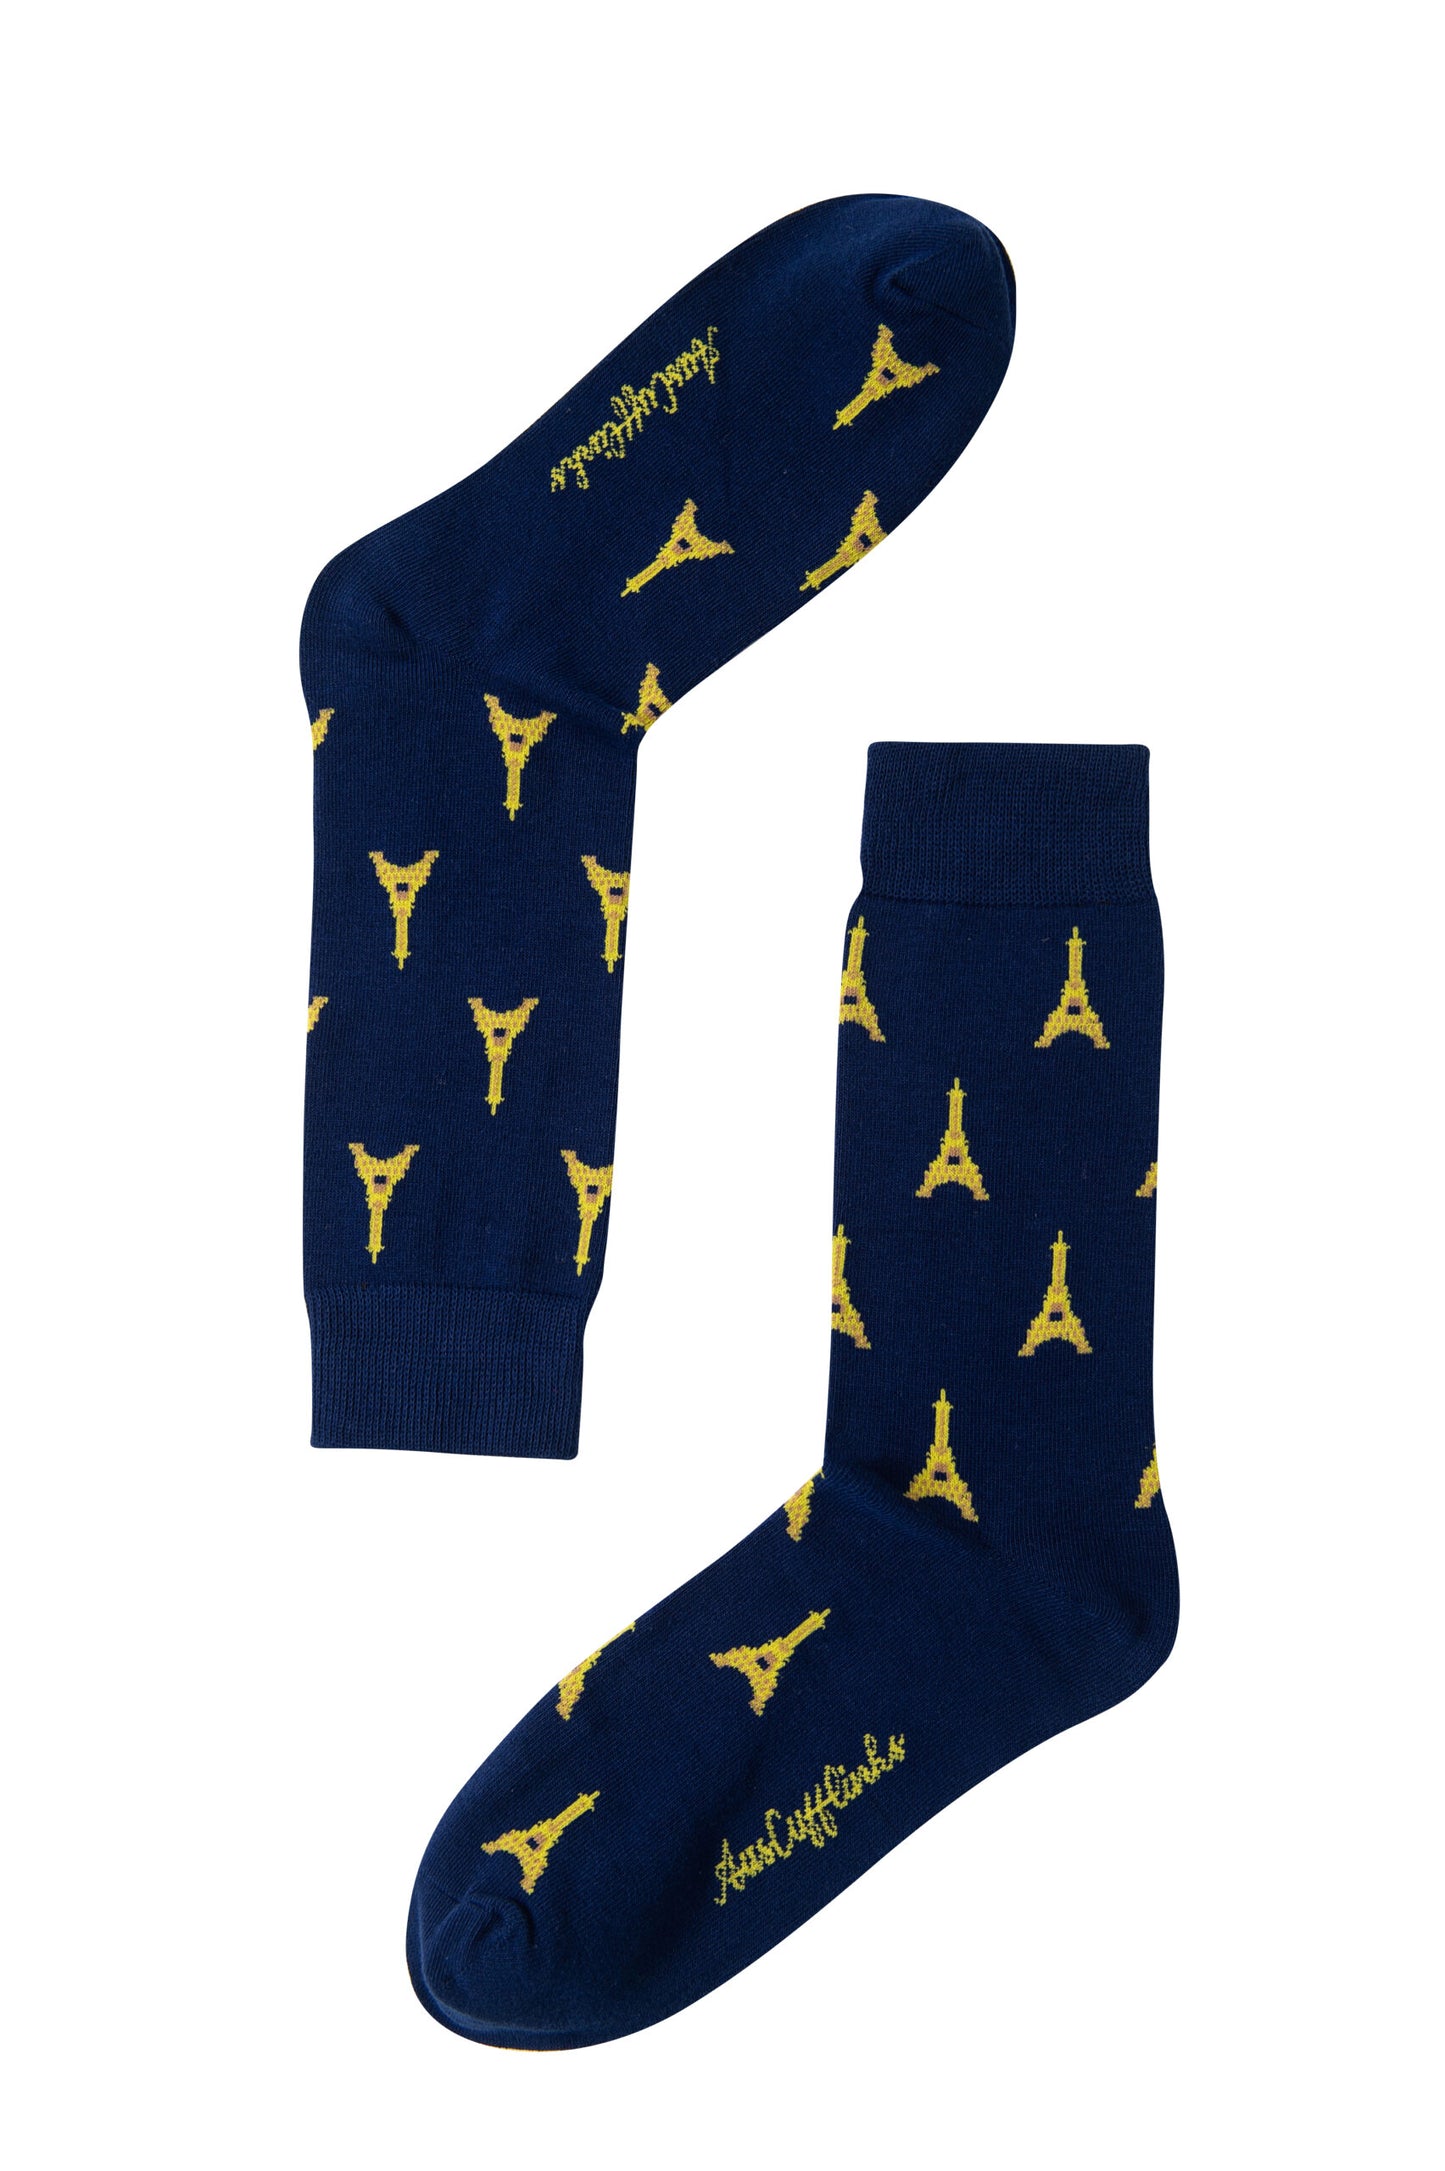 A pair of navy Eiffel Tower socks with yellow Eiffel towers on them.